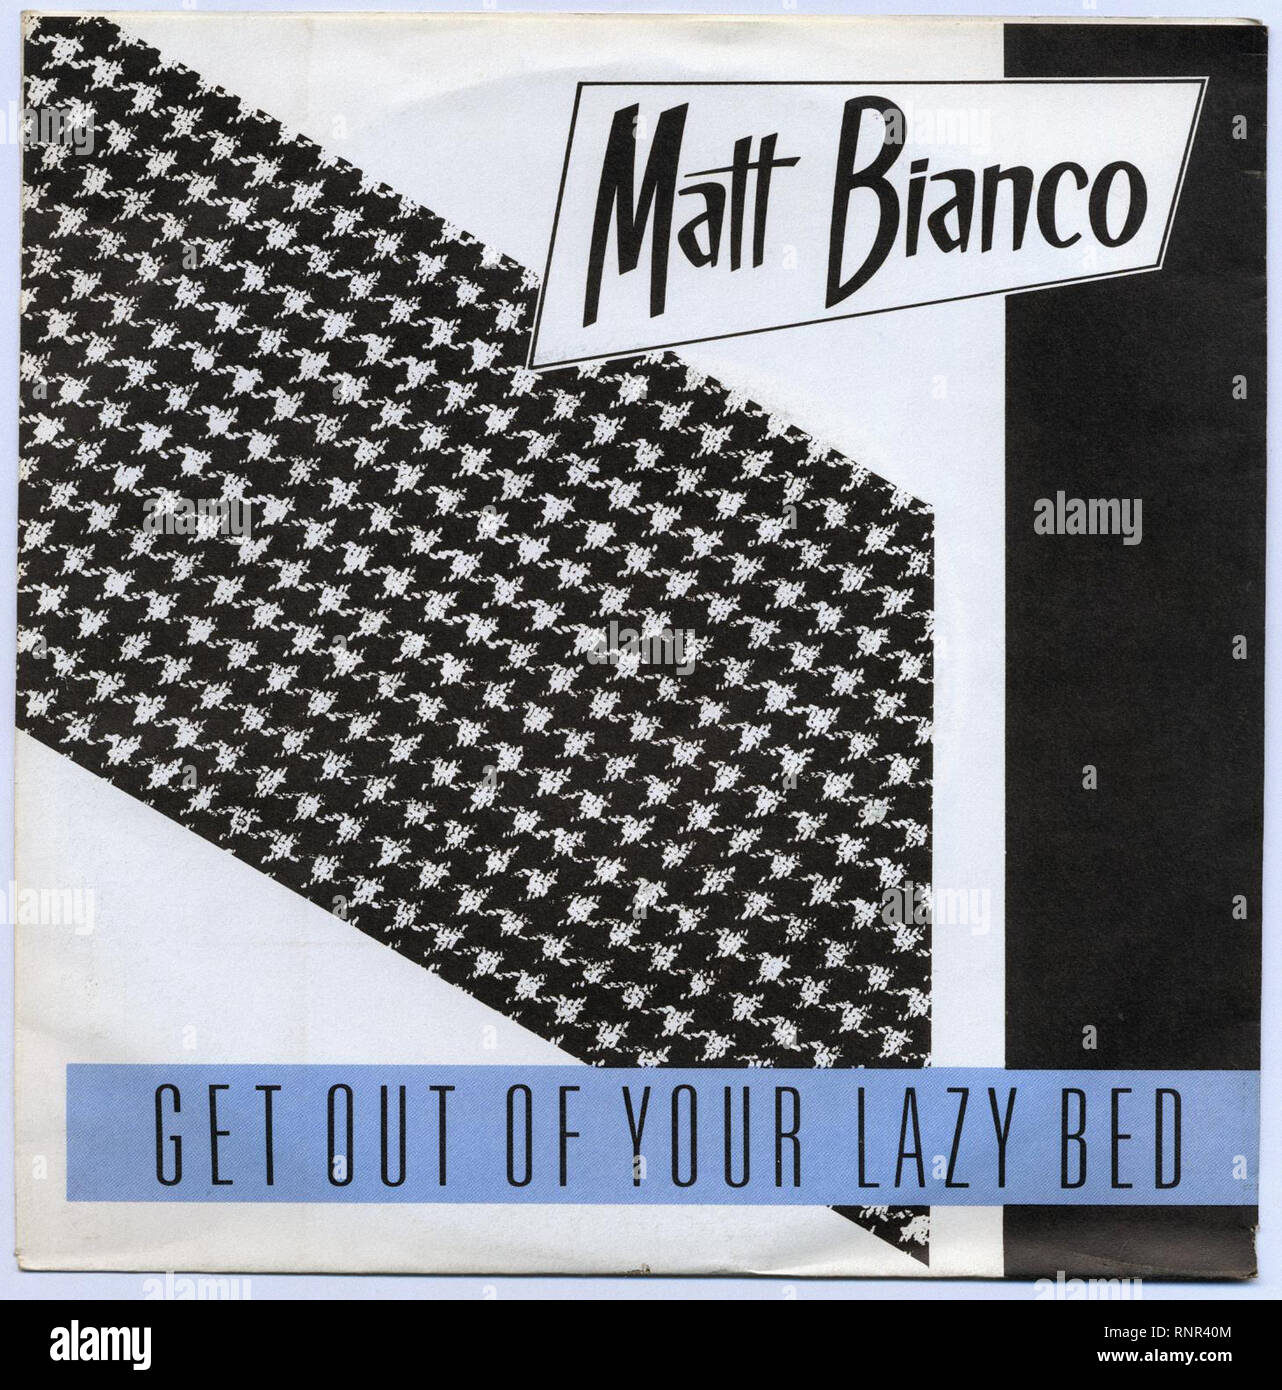 Matt Bianco - Get Out of your Lazy Bed - Vintage Cover Album Stock Photo -  Alamy